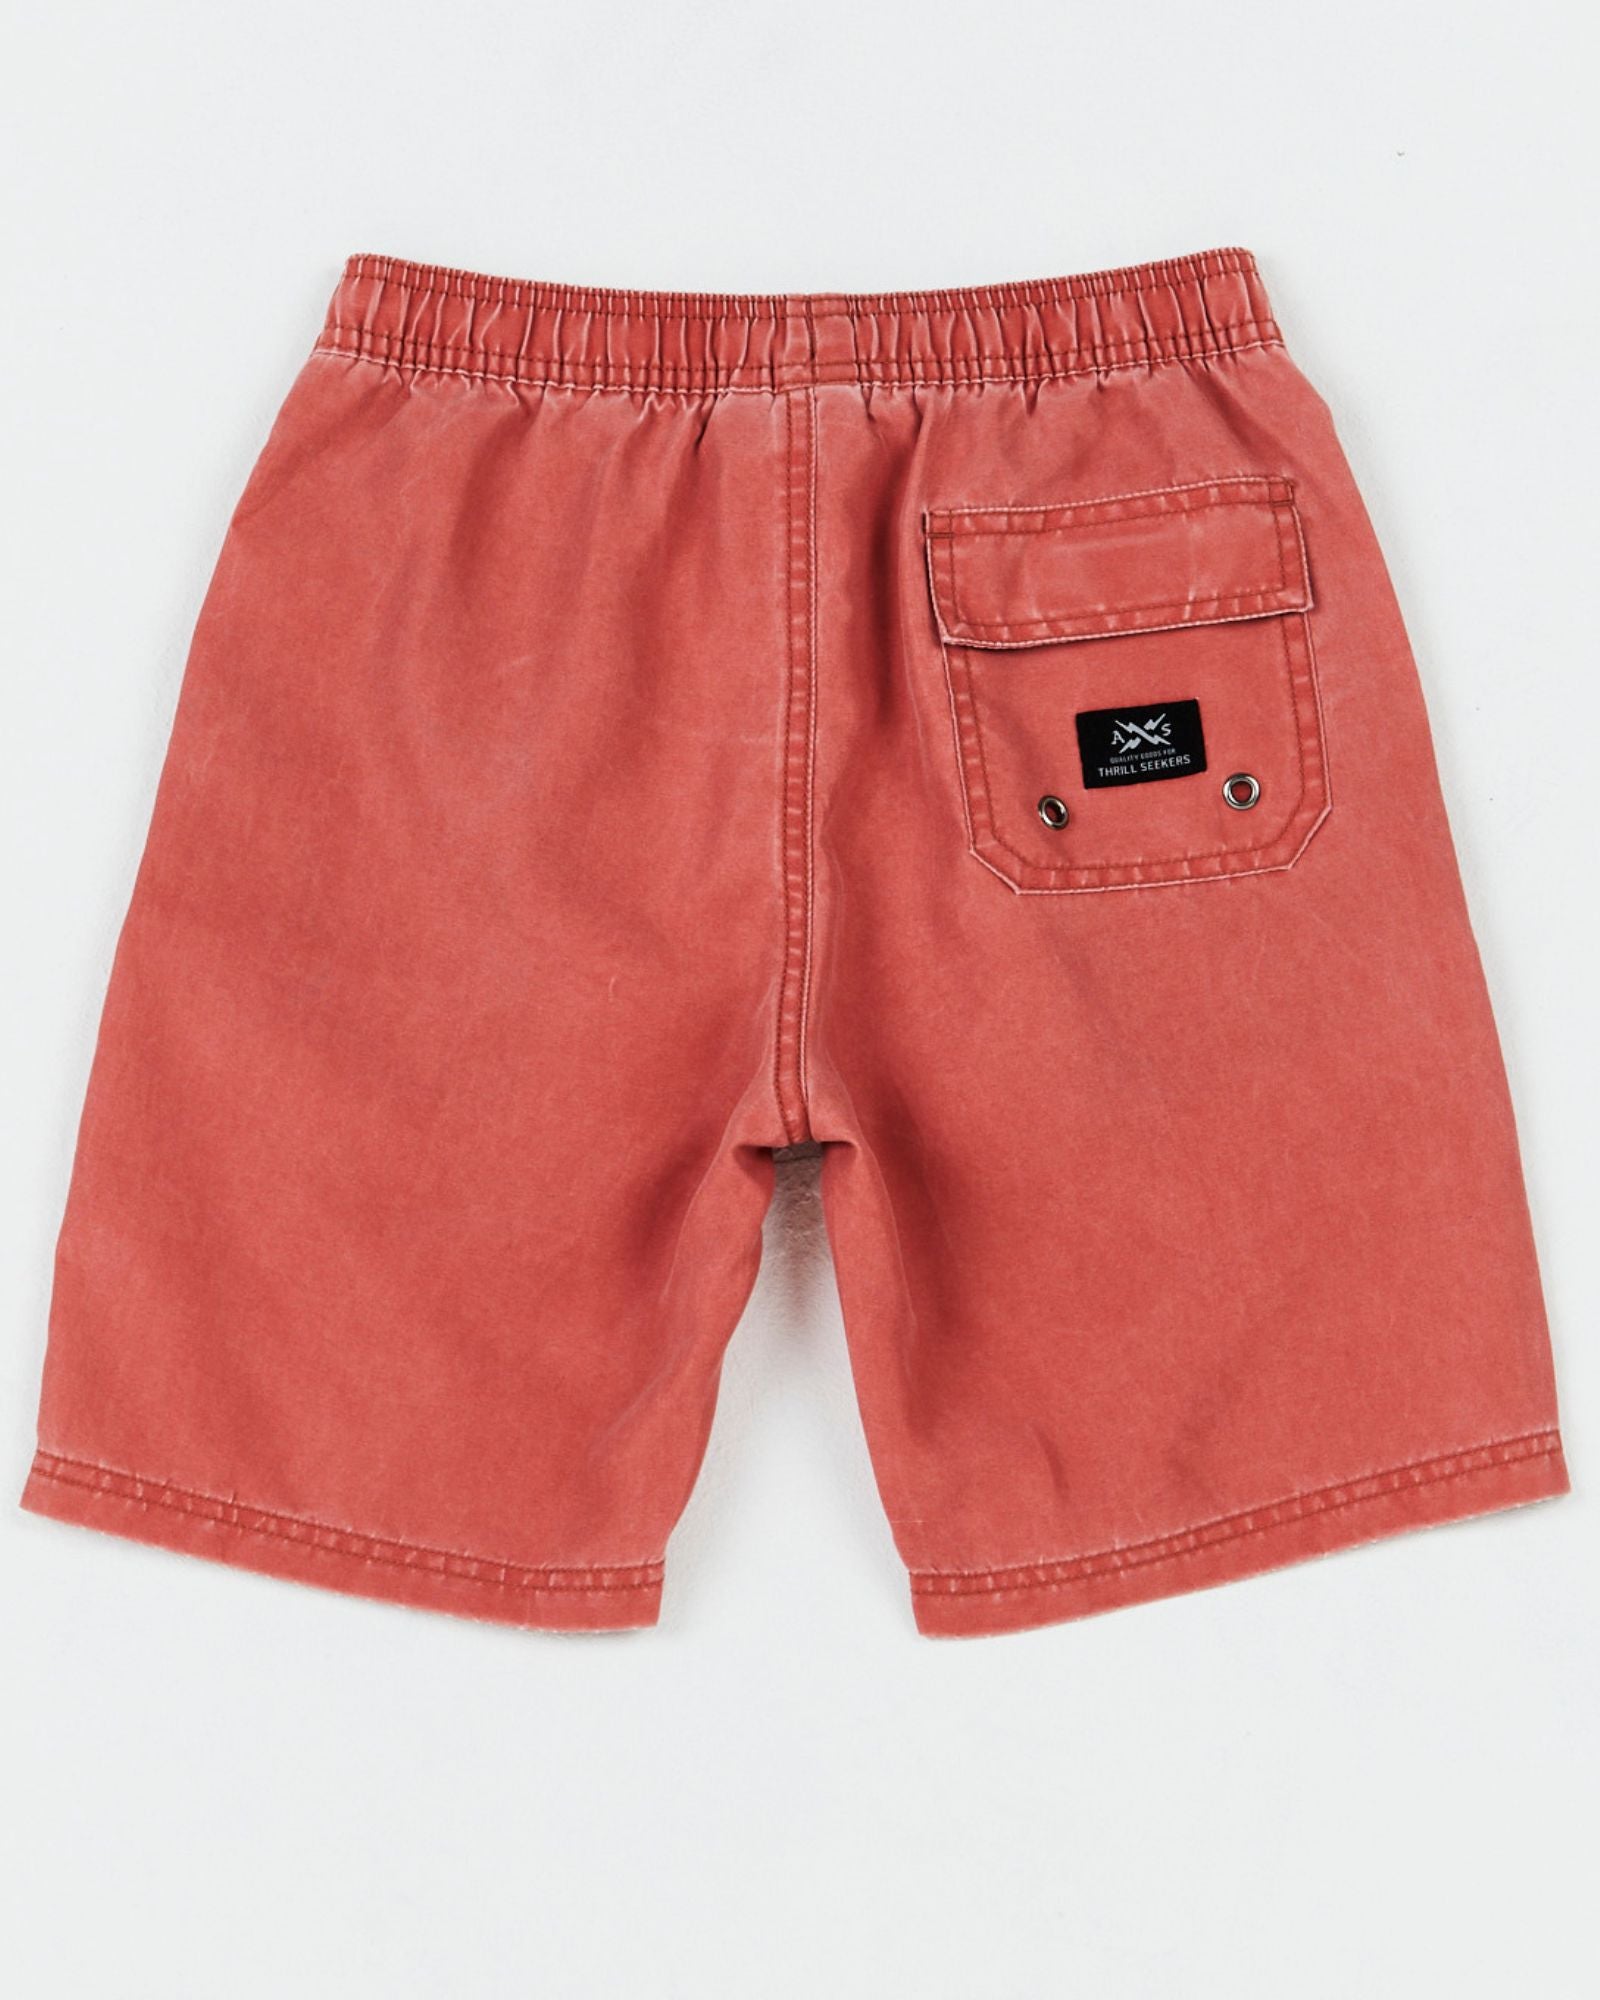 Alphabet Soup's Kids Go To Beach Shorts for boys aged 8 to 16 are crafted with quick-dry, non-stretch polyester. Two mesh-lined pockets and a velcro back pocket store all his summer essentials. A logo badge and woven patch complete the look.